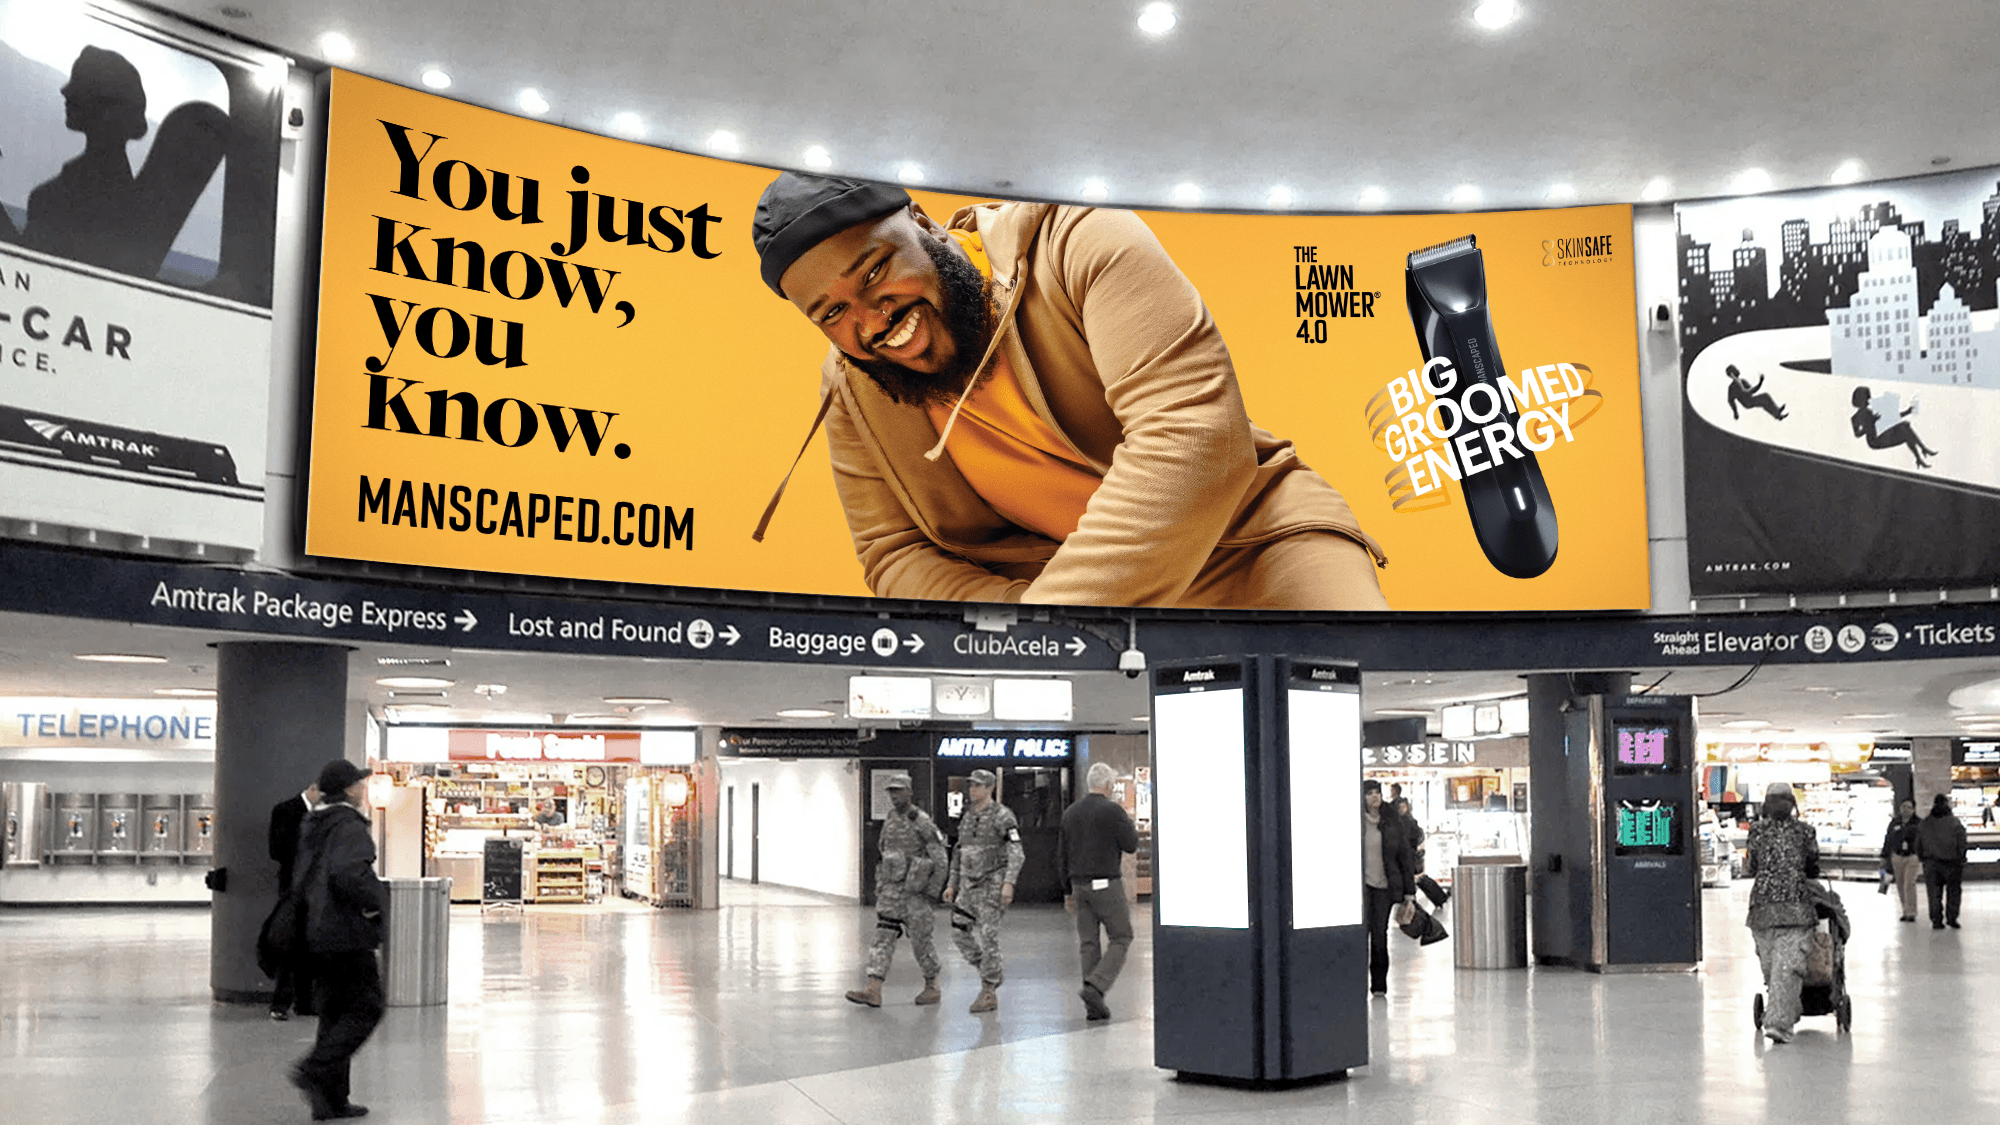 MANSCAPED™ Brings “Big Groomed Energy” to NYC with Complete Takeover of Penn and PATH Stations